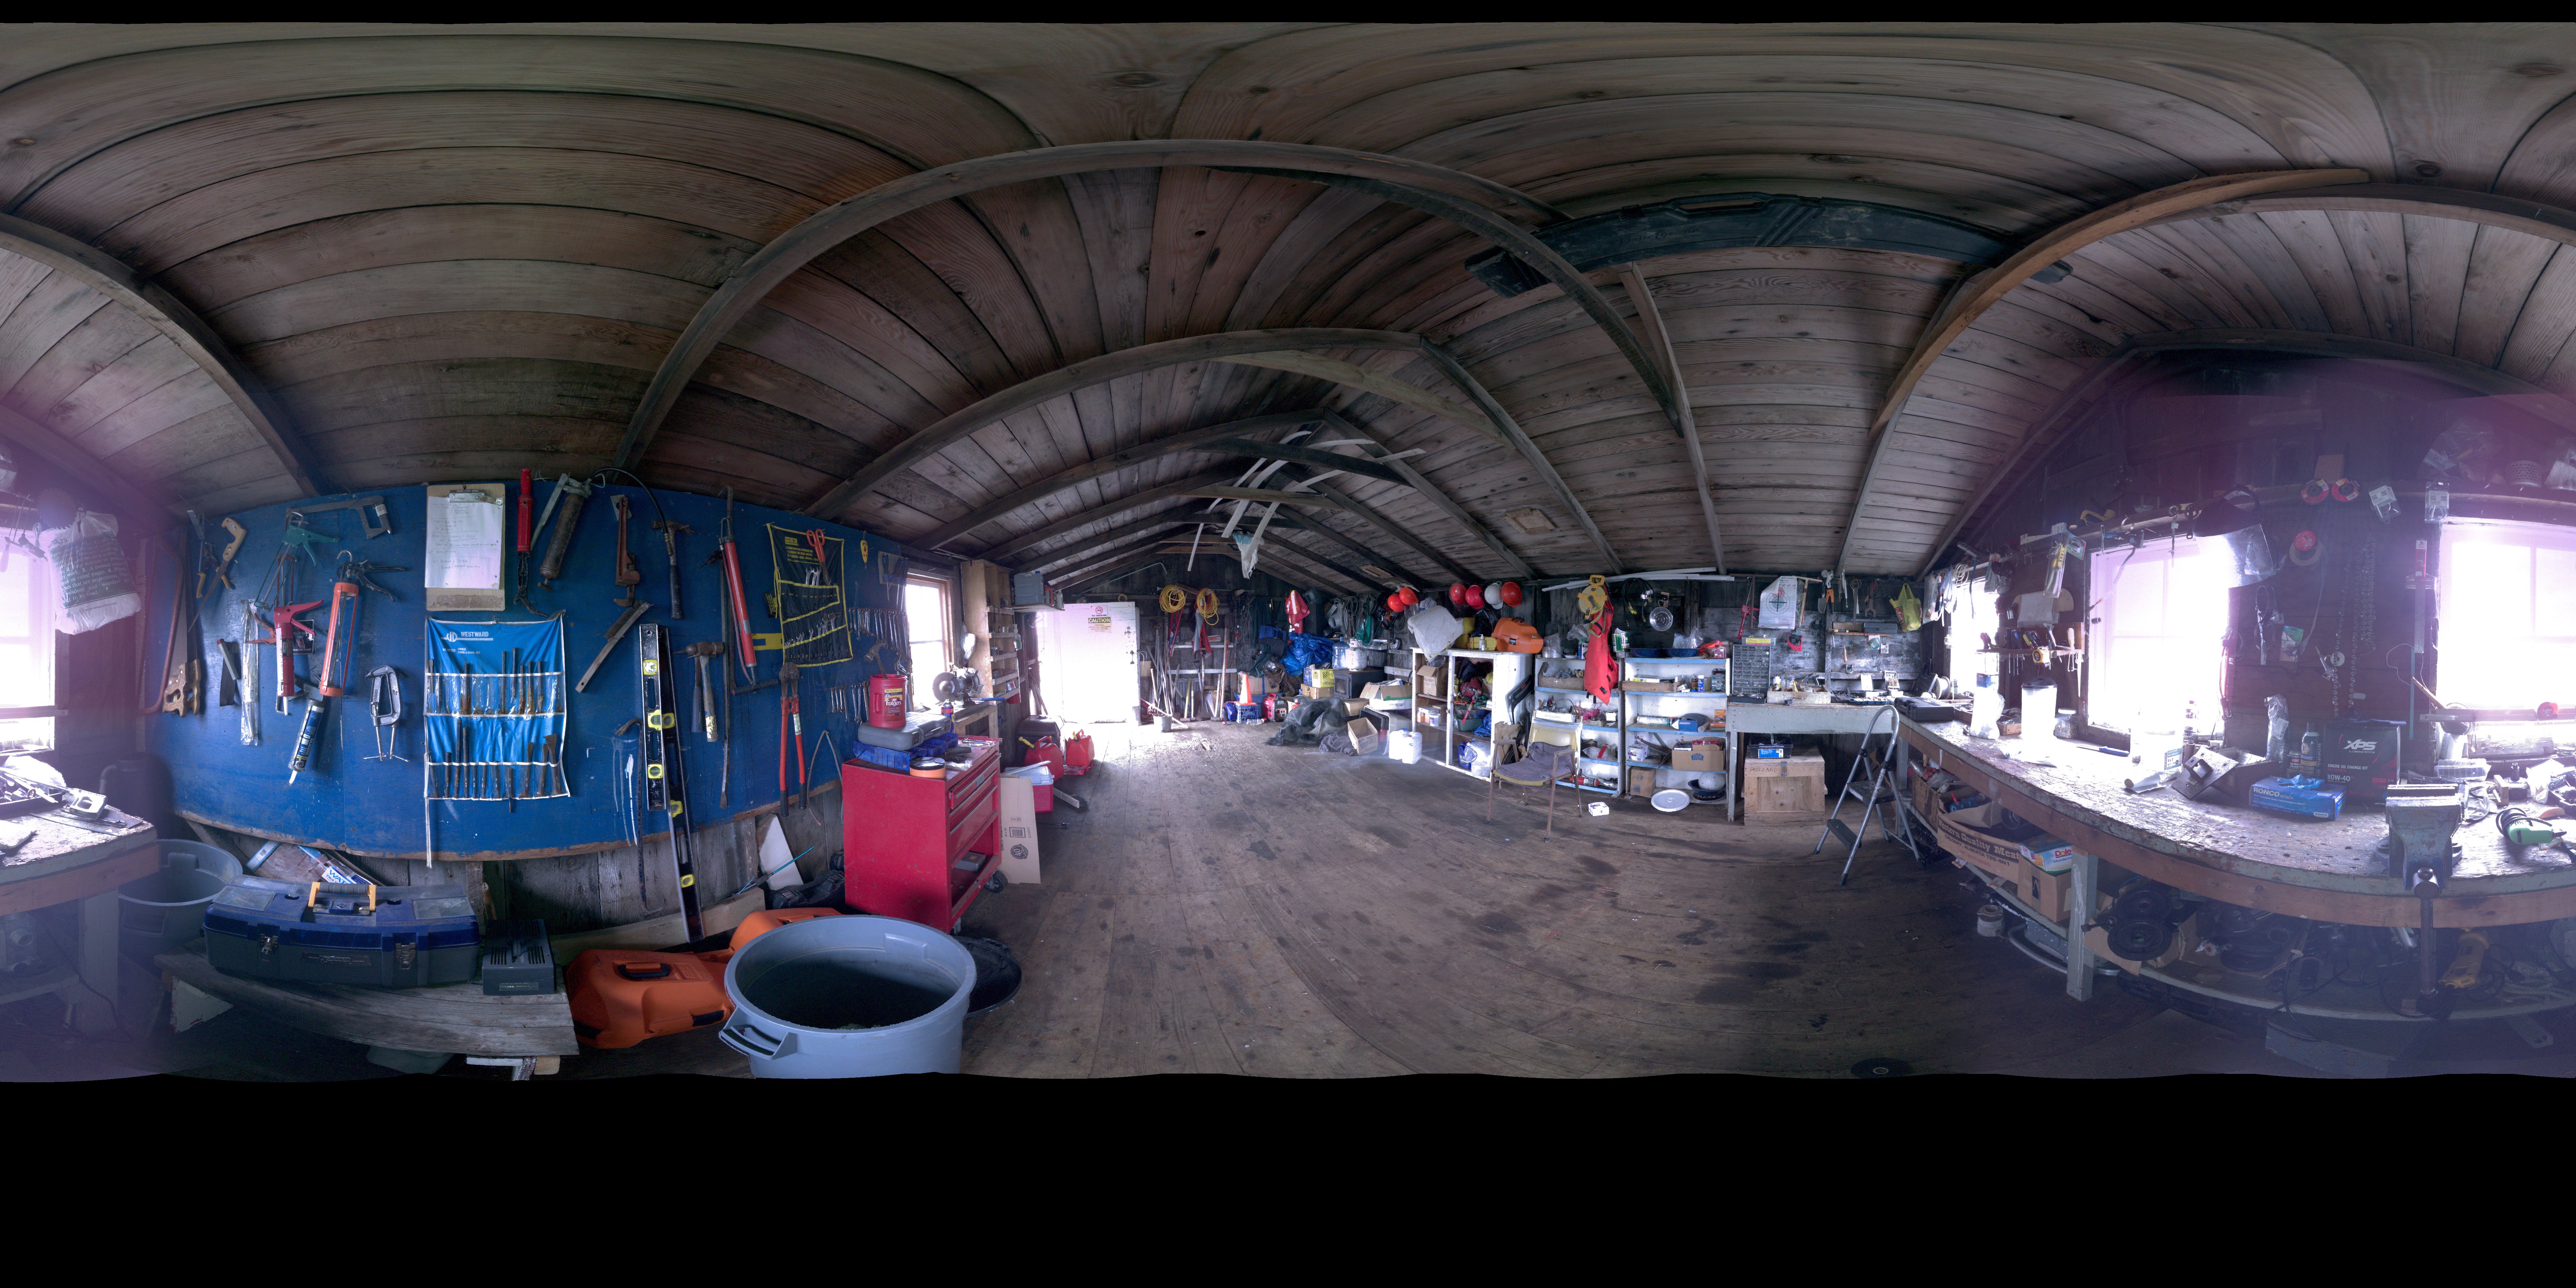 Panoramic view of the interior of the Blubber House from scanning location 3